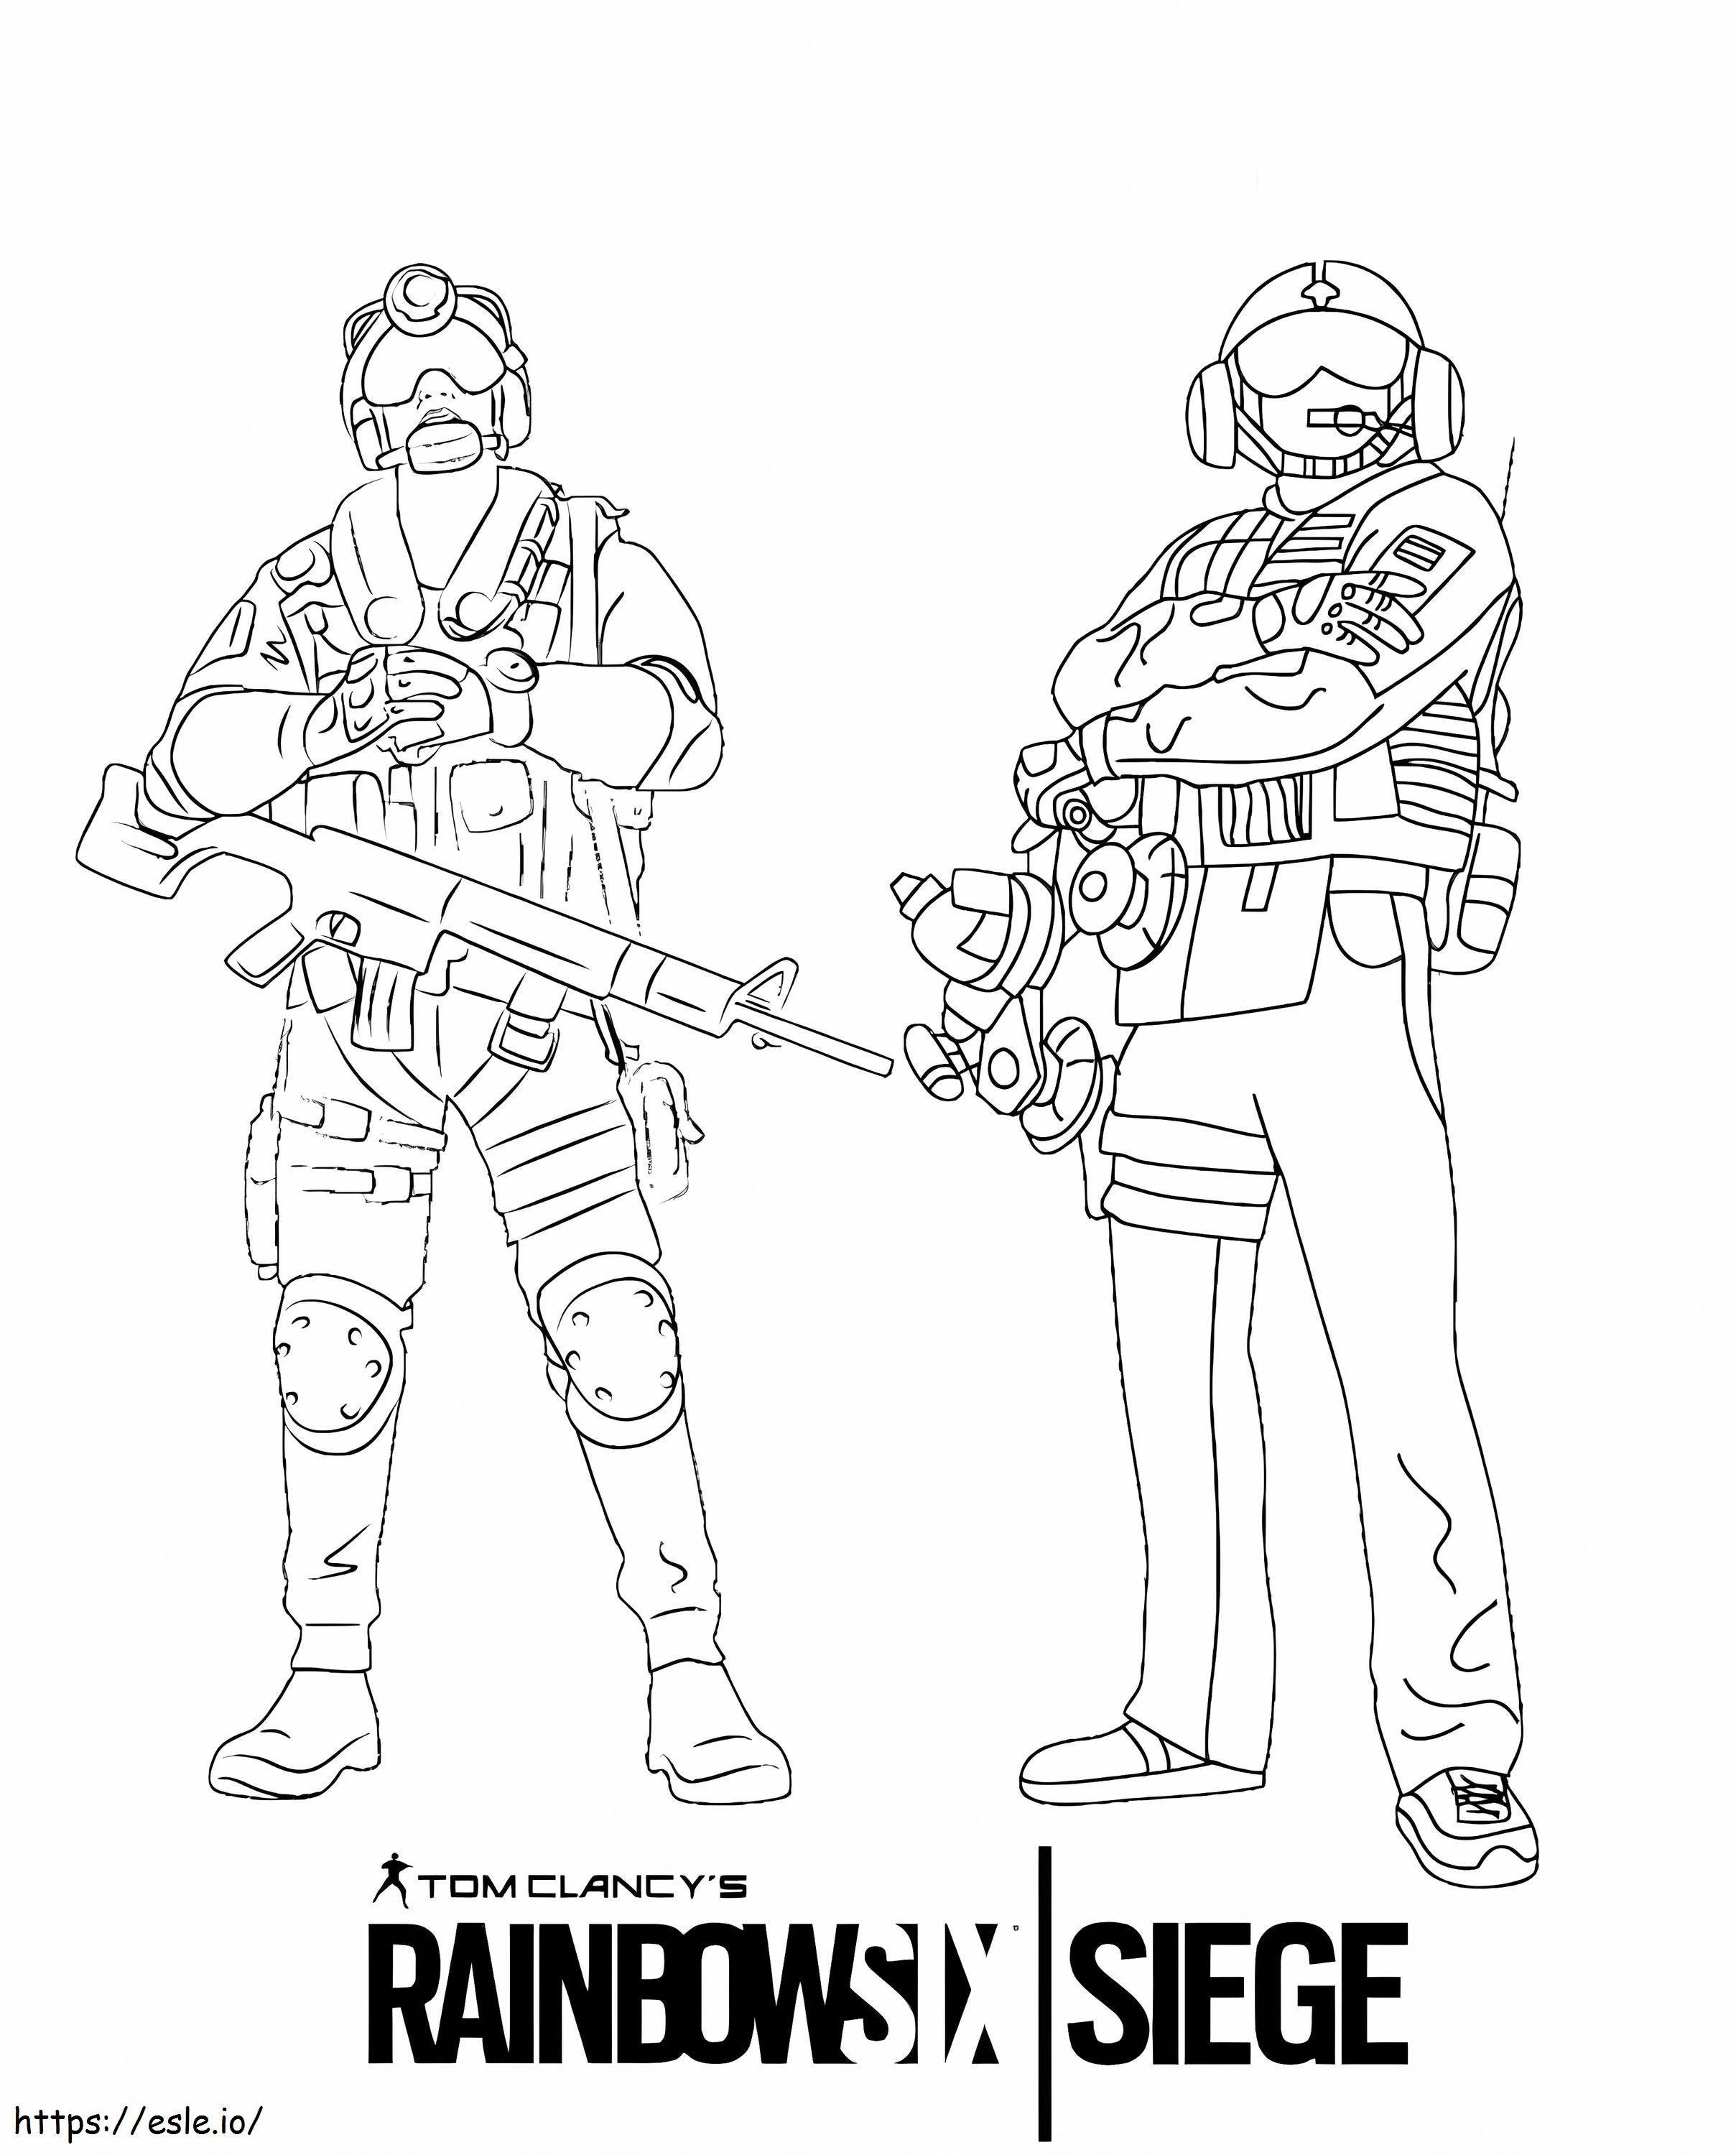 Chacal y Jager Rainbow Six Siege para colorear